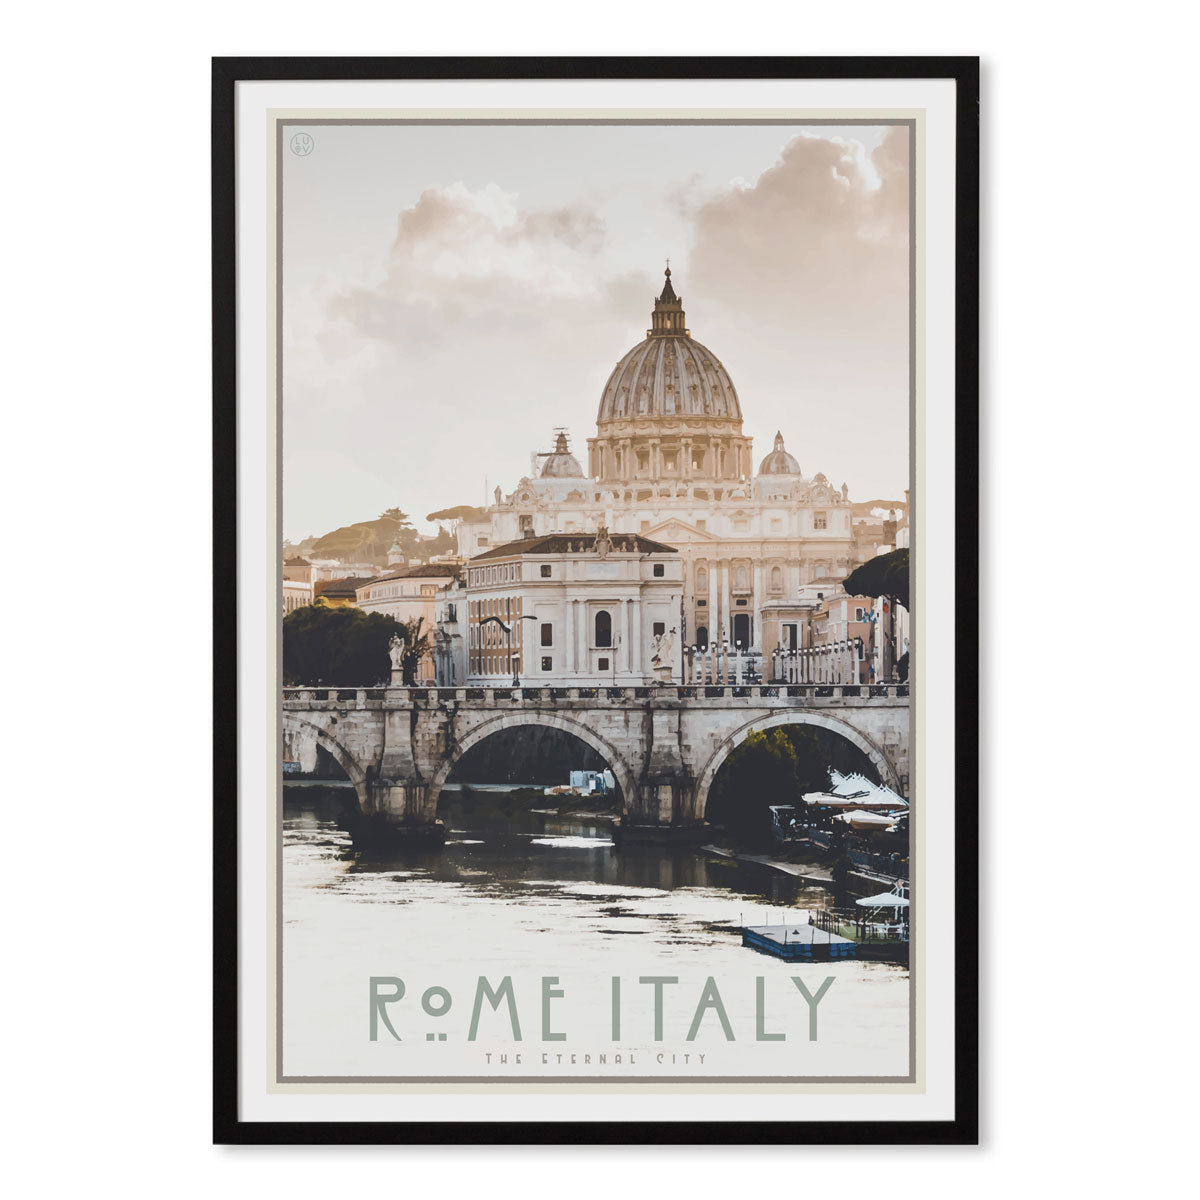 Rome Italy vintage travel style black framed poster by places we luv